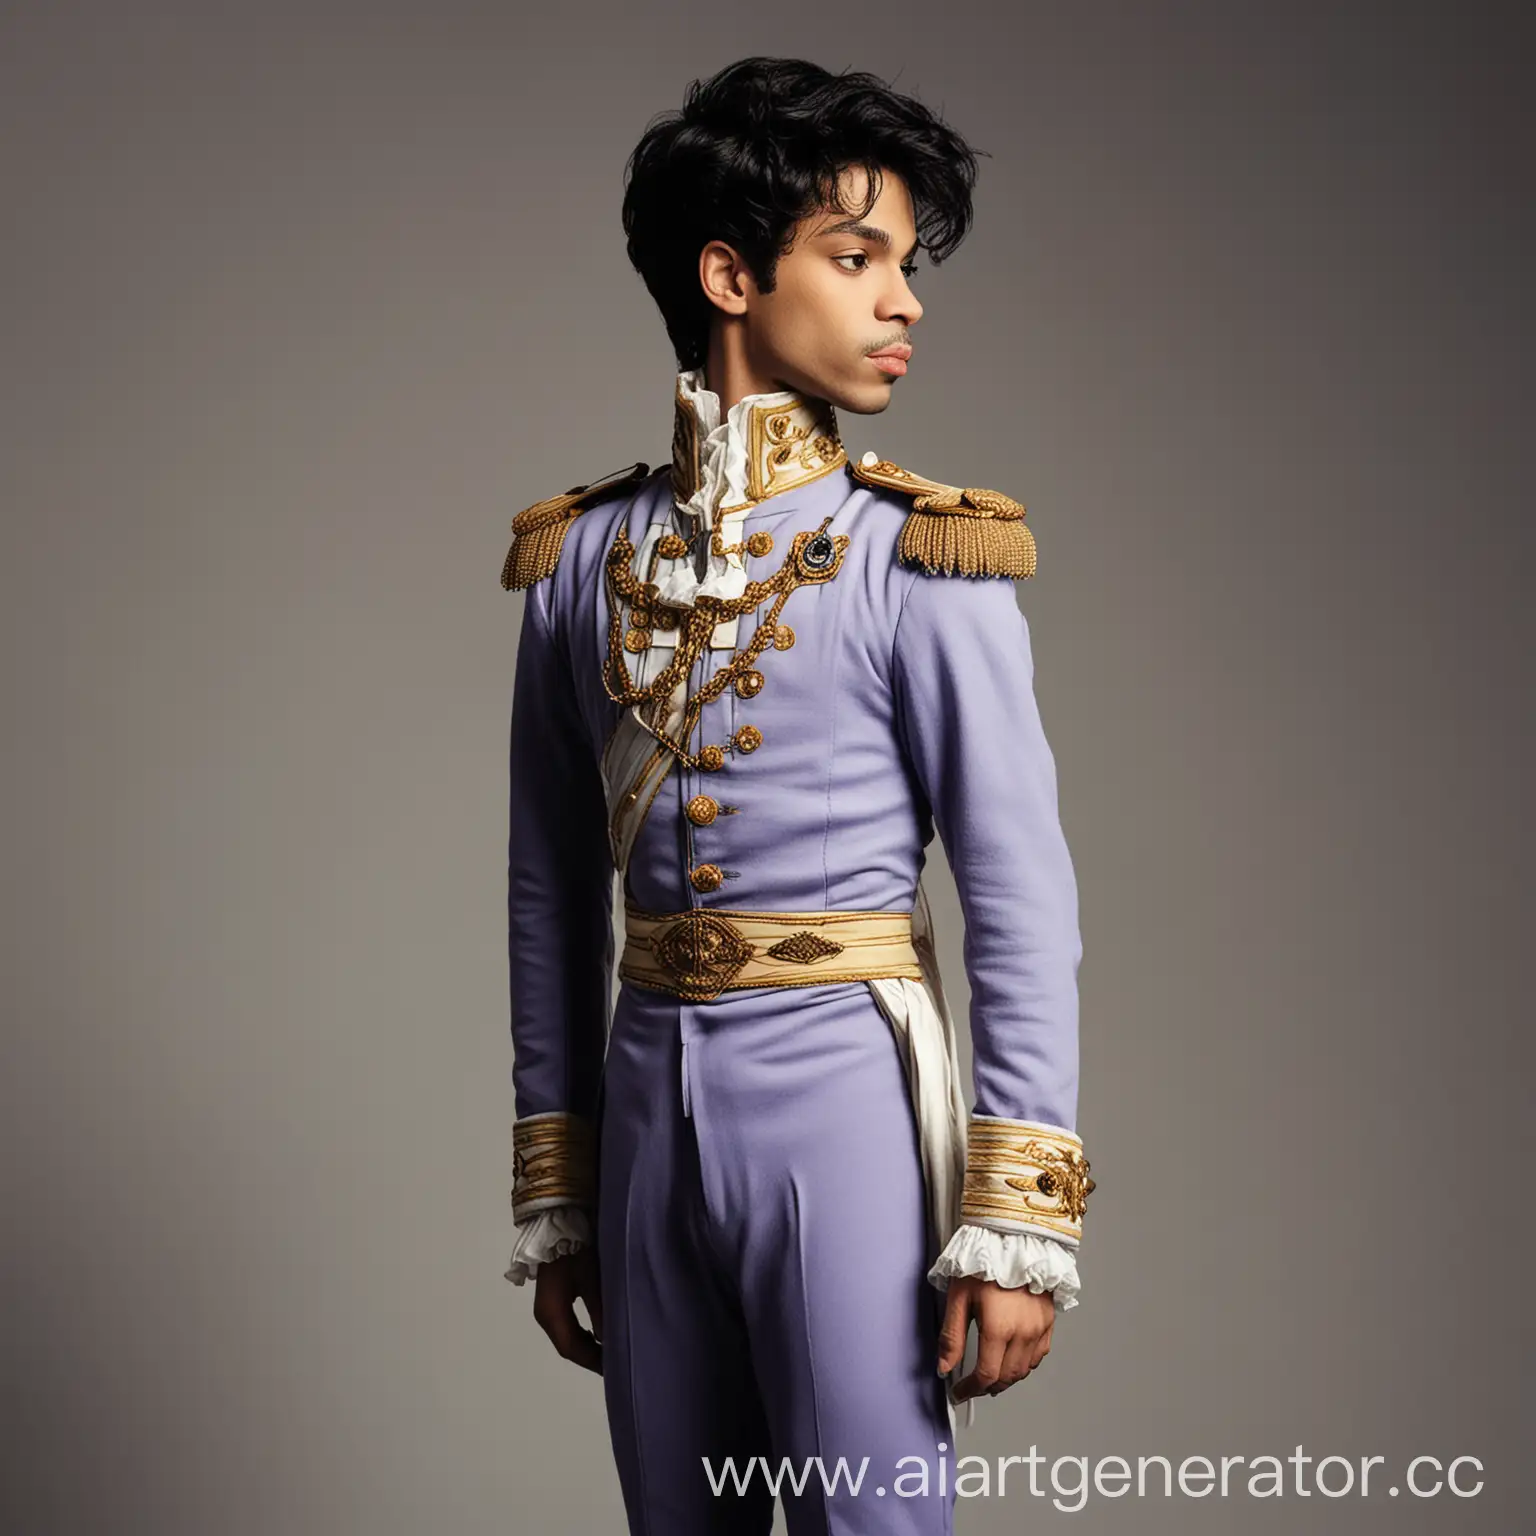 Prince-Standing-Full-Height-in-HalfProfile-Pose